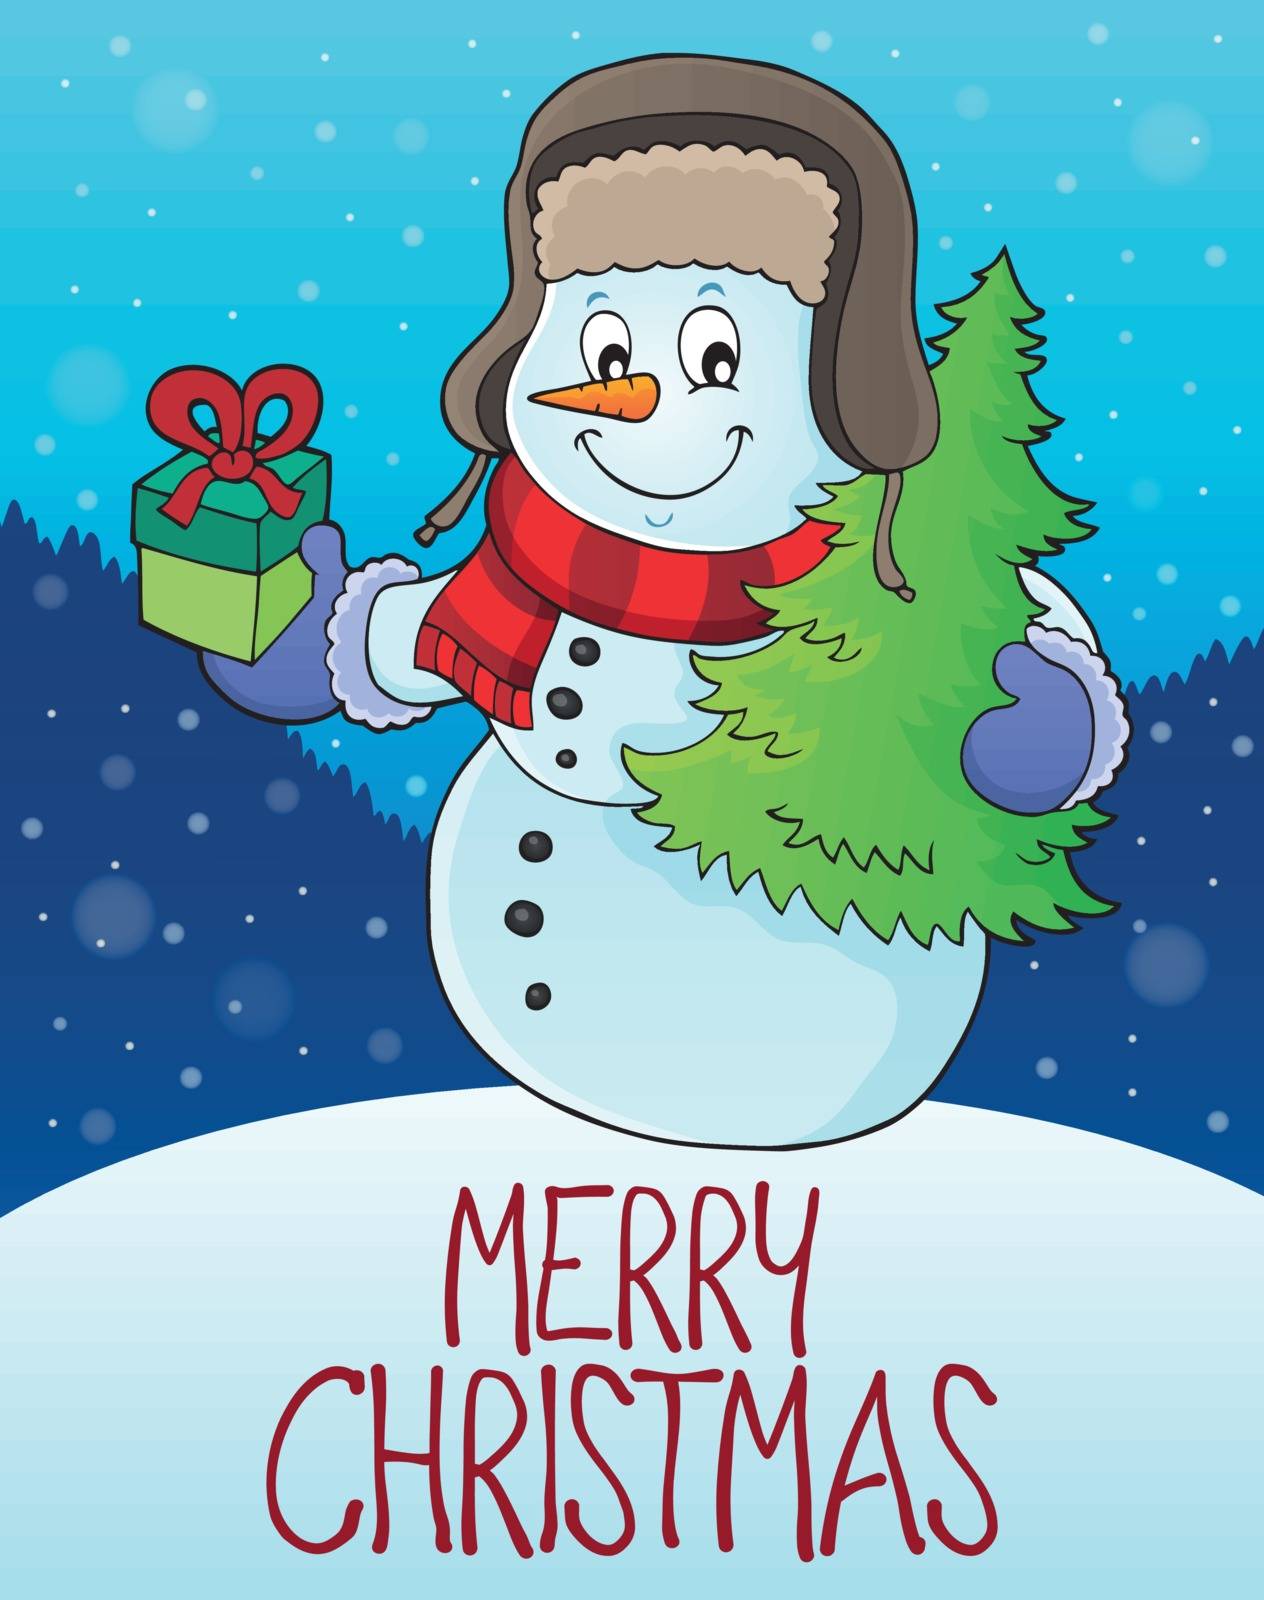 Merry Christmas subject image 9 by clairev